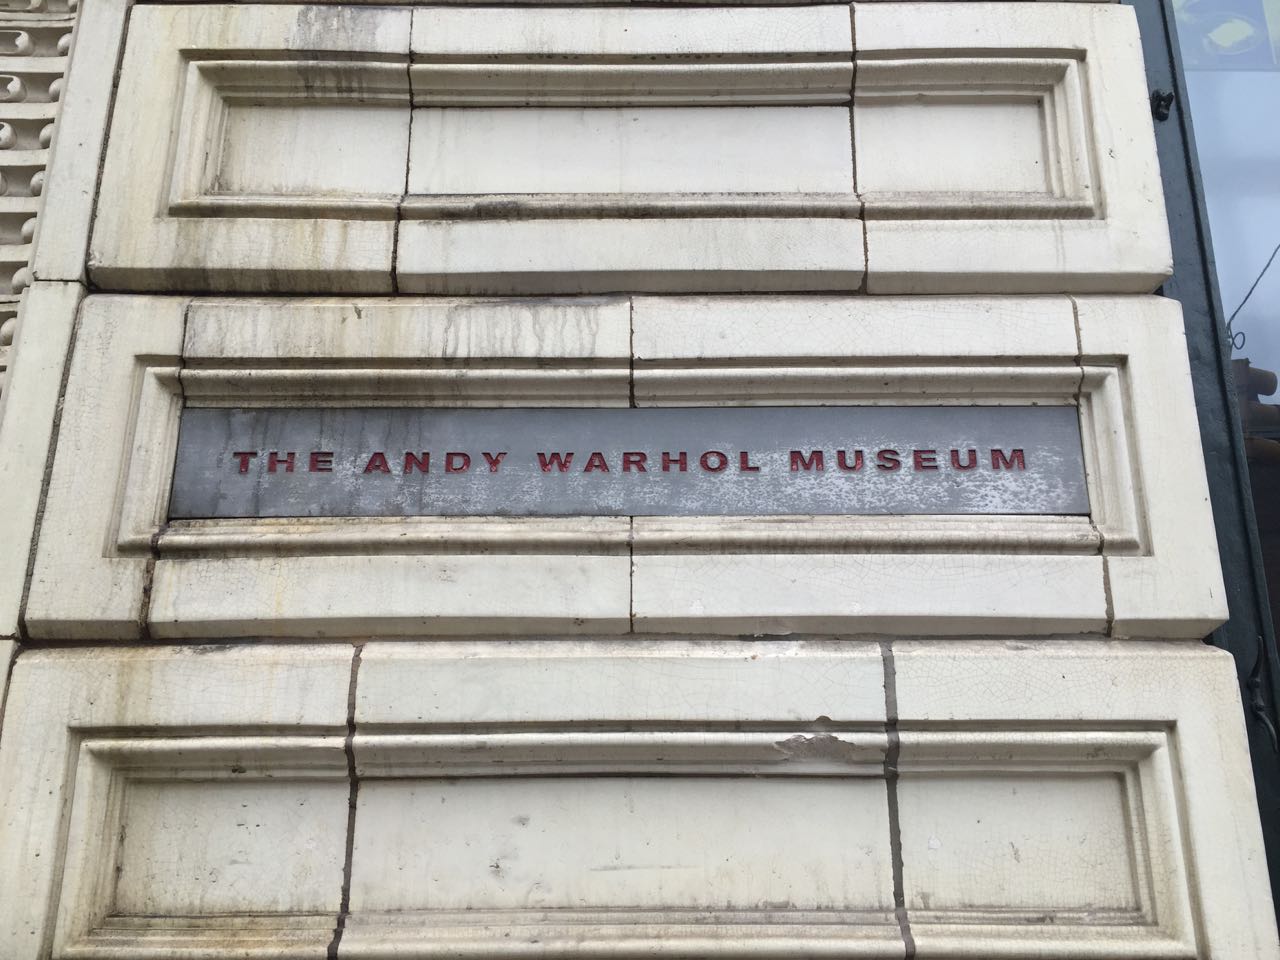 The Andy Wharol Museum